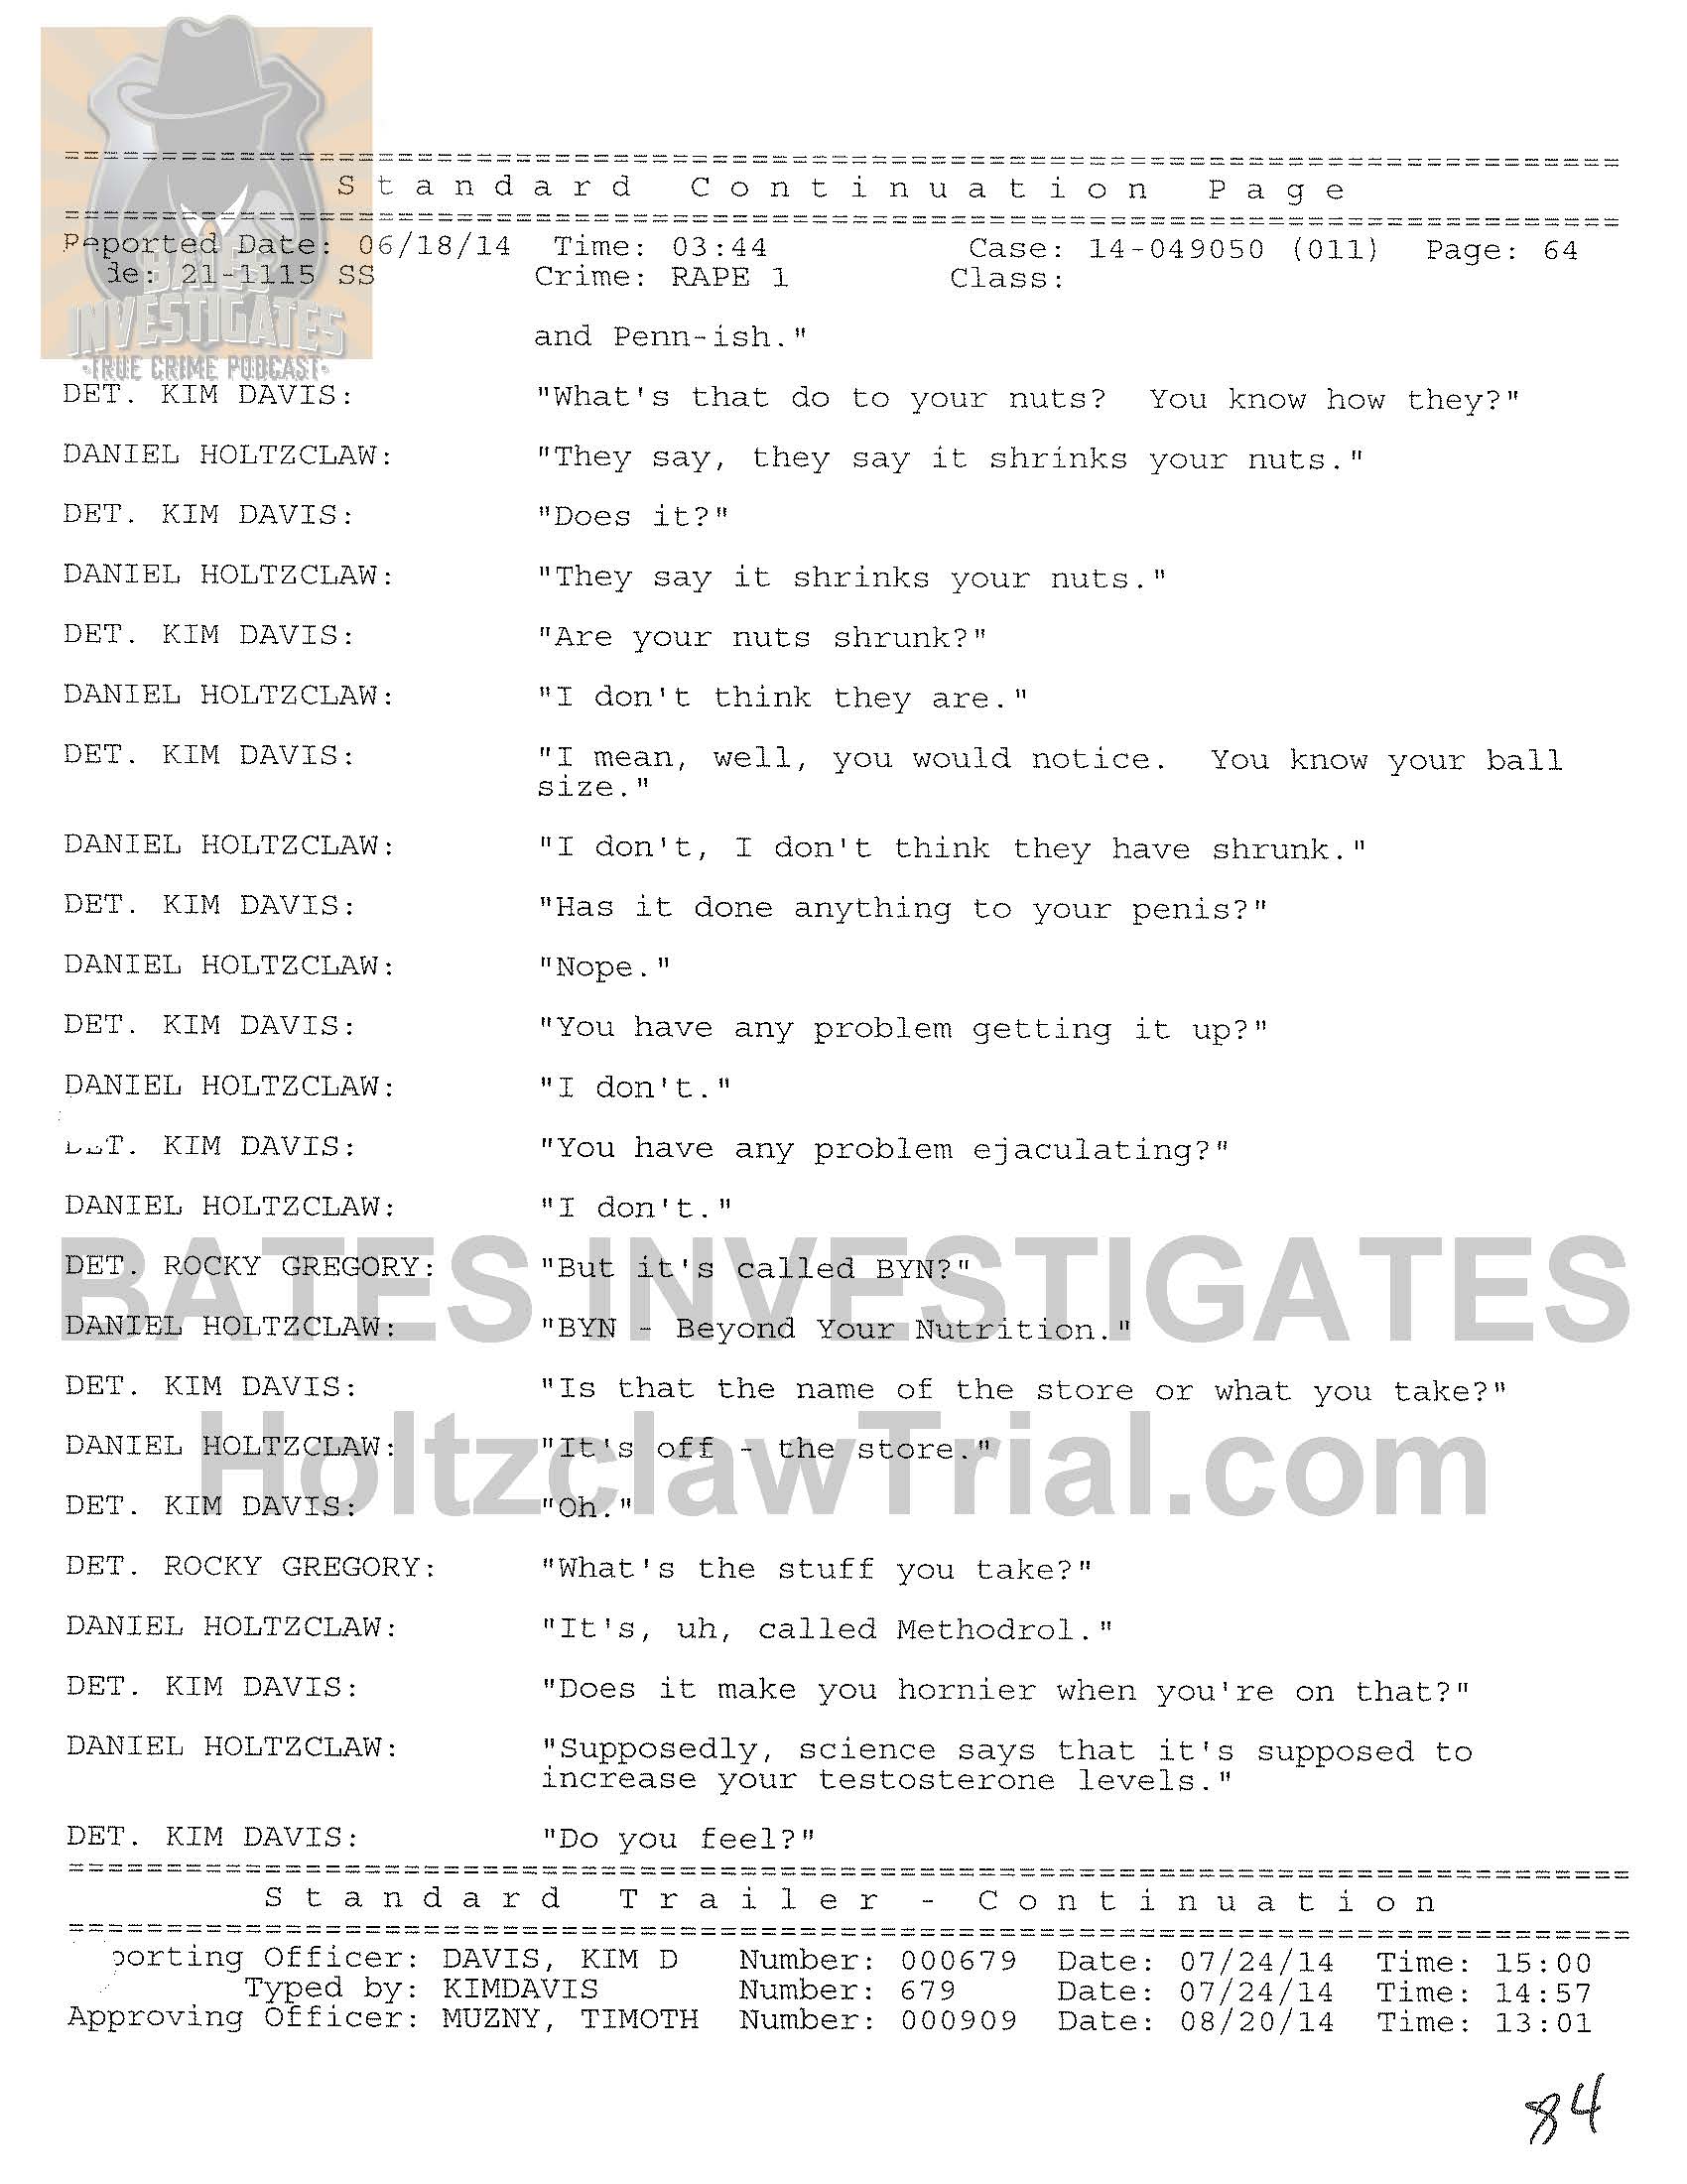 Holtzclaw Interrogation Transcript - Ep02 Redacted_Page_64.jpg